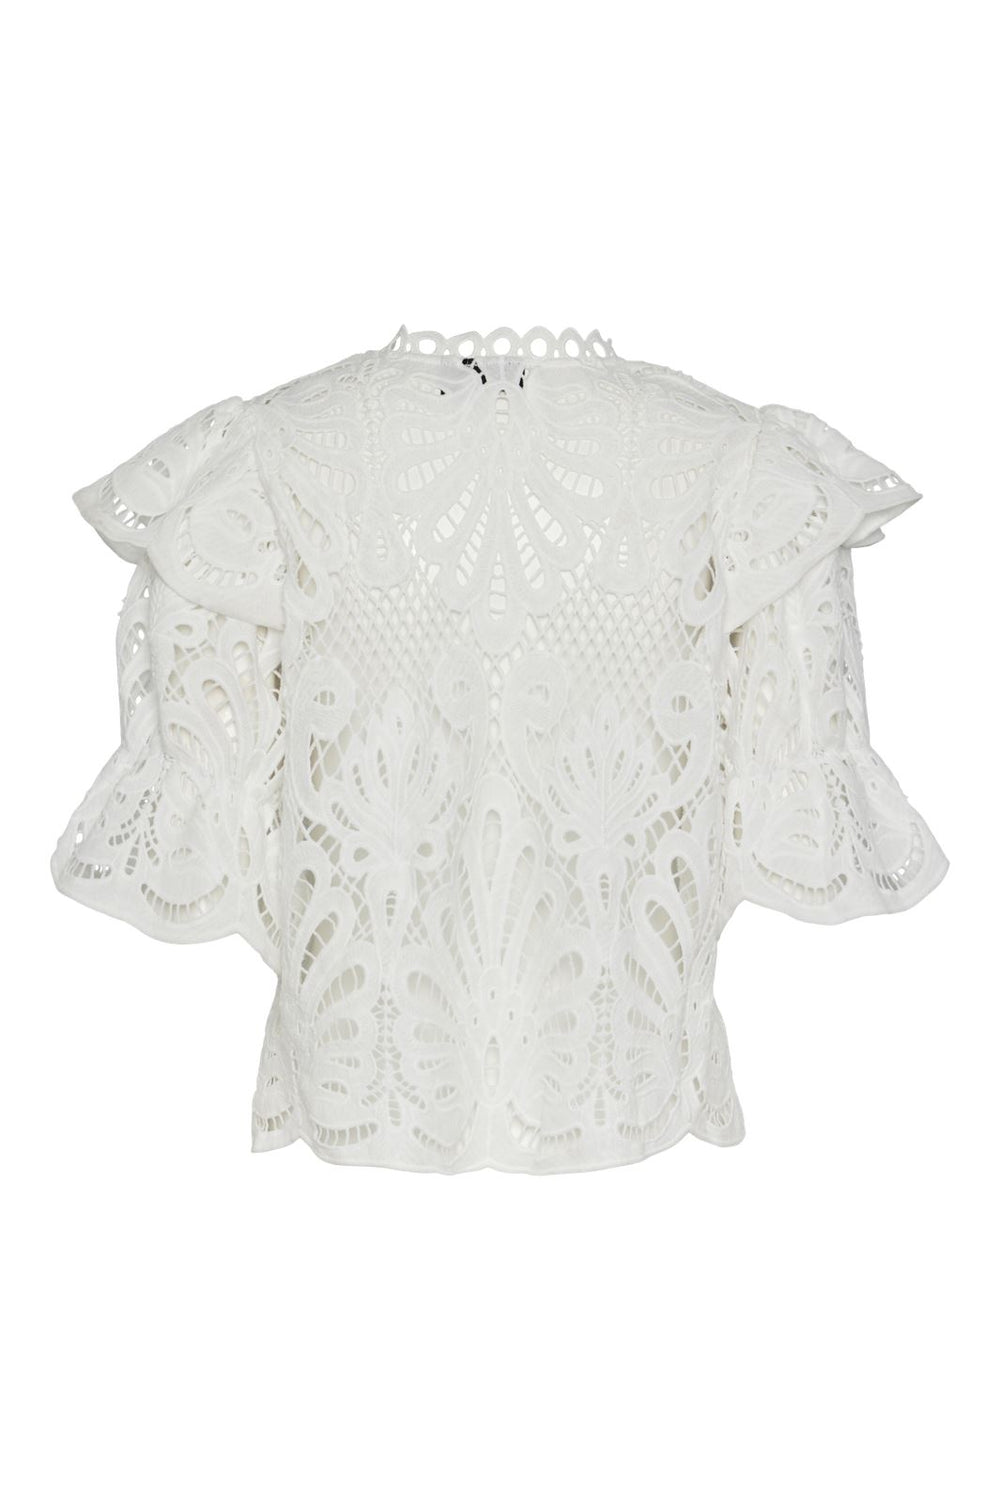 Pieces - Pclykke 2/4 Lace Top - 4579276 Bright White